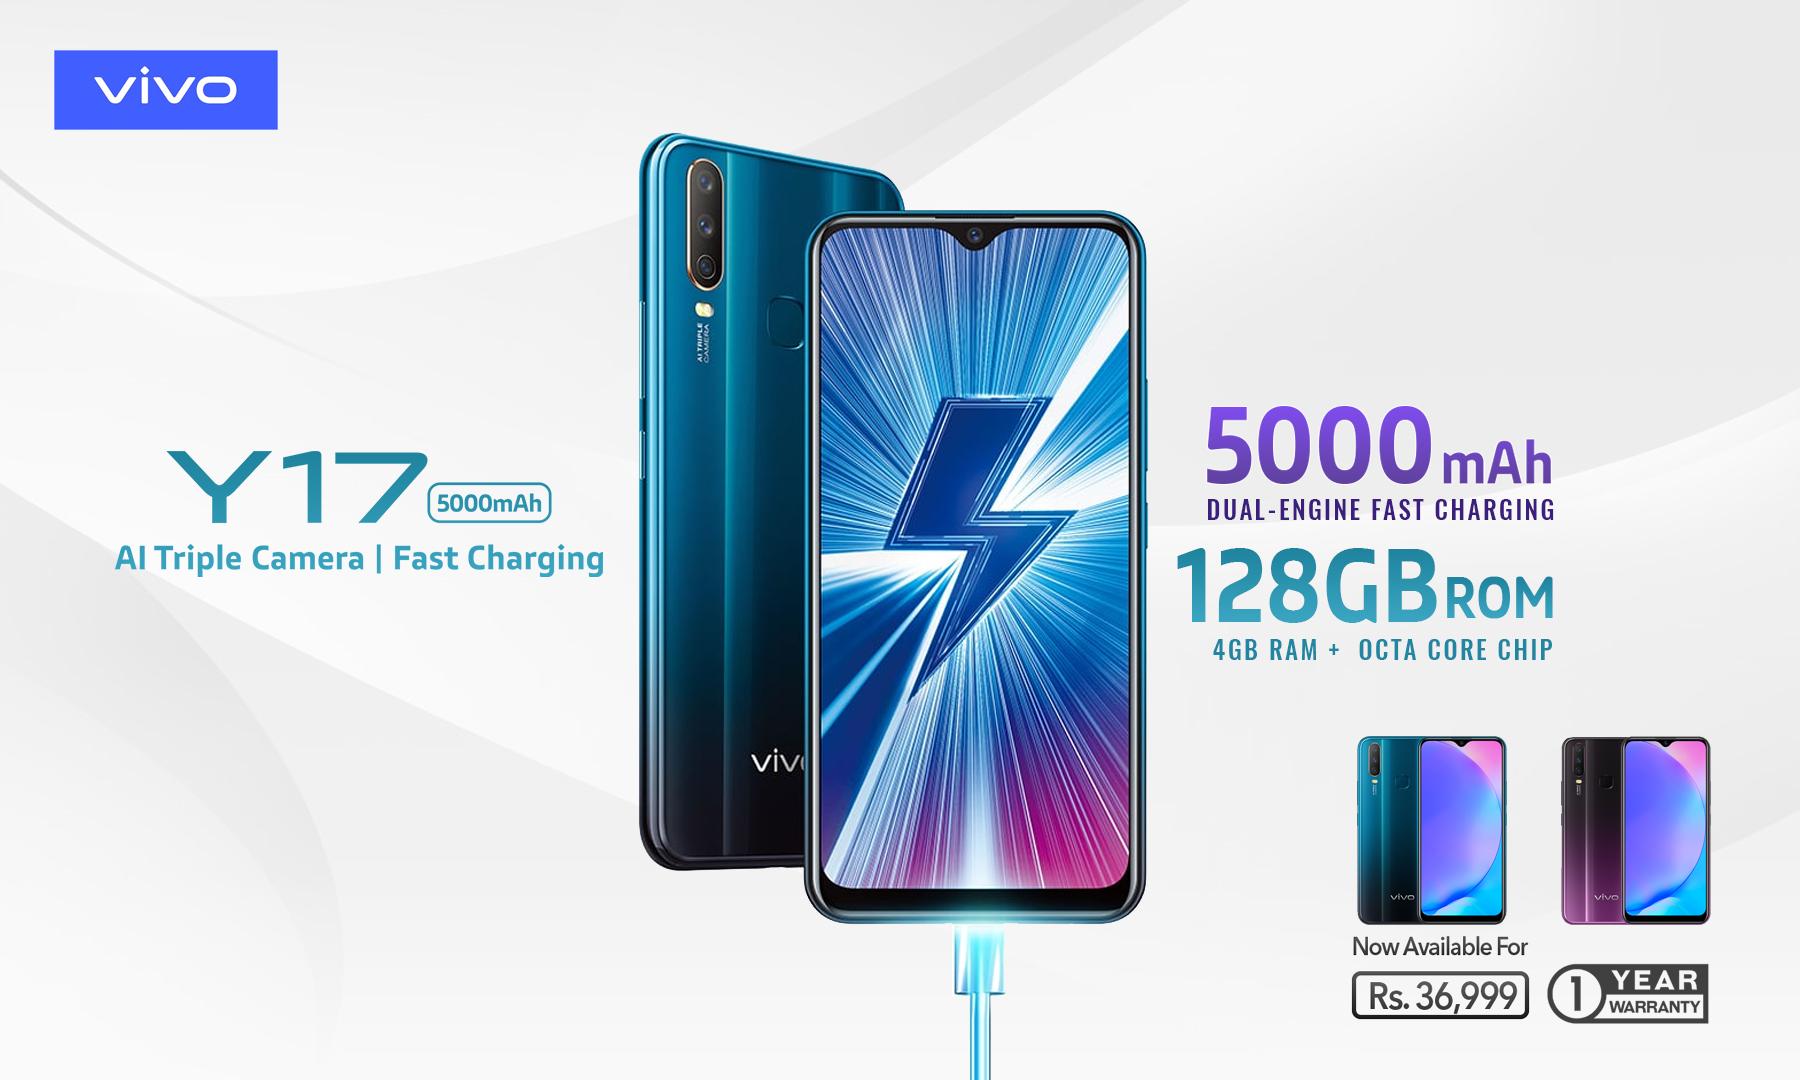 Vivo Y17 Packs a Massive 5000mAh Battery with Dual-Engine Fast Charging